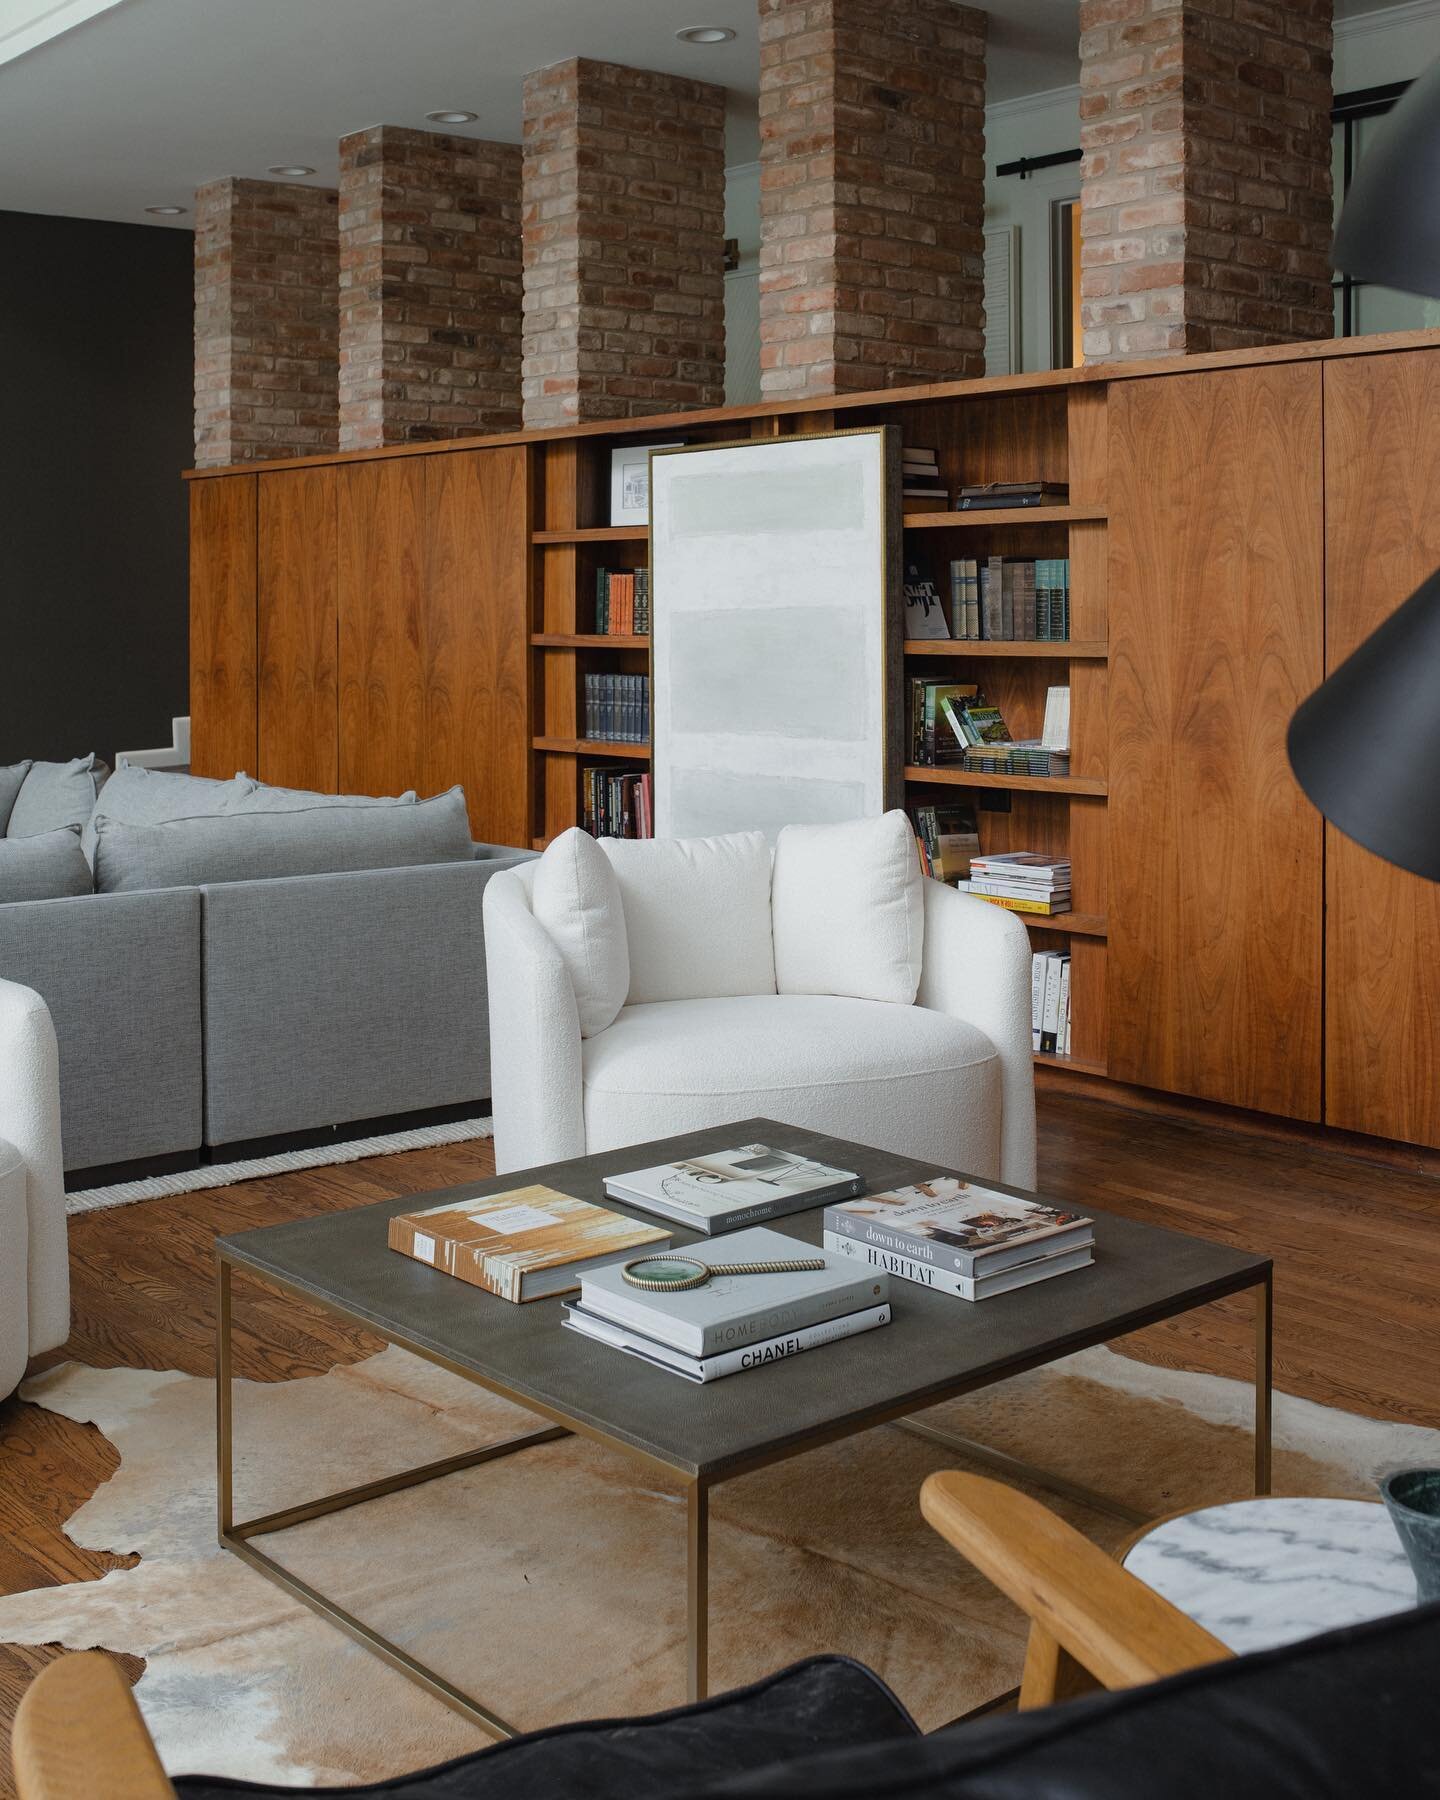 Big fan of mixing old and new to create something interesting and unexpected. In this case, I mixed modern furnishings with the original brick and wood cabinetry for a fresh take. 

#BCS #BCSdesigner #cstat #home #reno #livingroom #ProjectLosPatios